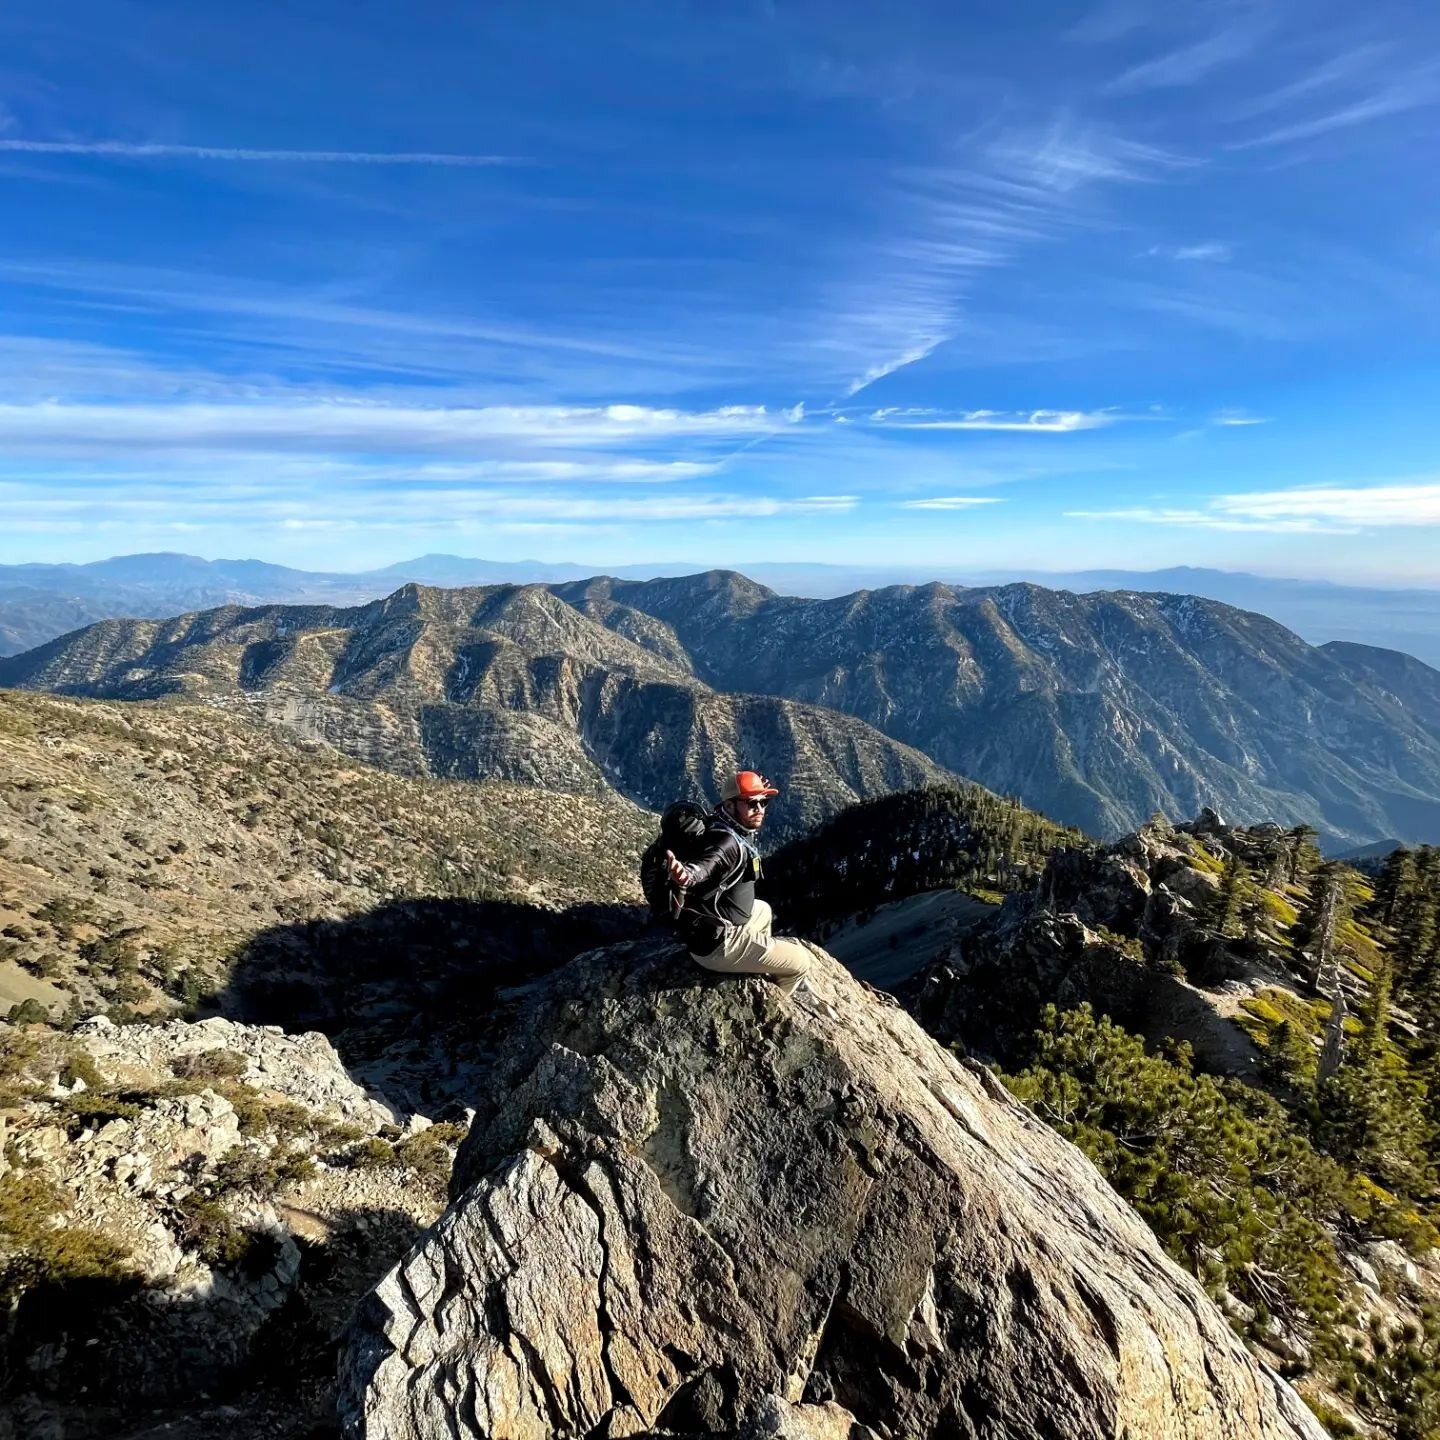 JUST TREK is a community/hiking group in LA founded by Justin Rimon. Tune in to hear about Justin's journey to cultivate this important outdoor community in Southern California. Sandstone peak is his favorite hike, what's yours? Share in the comments